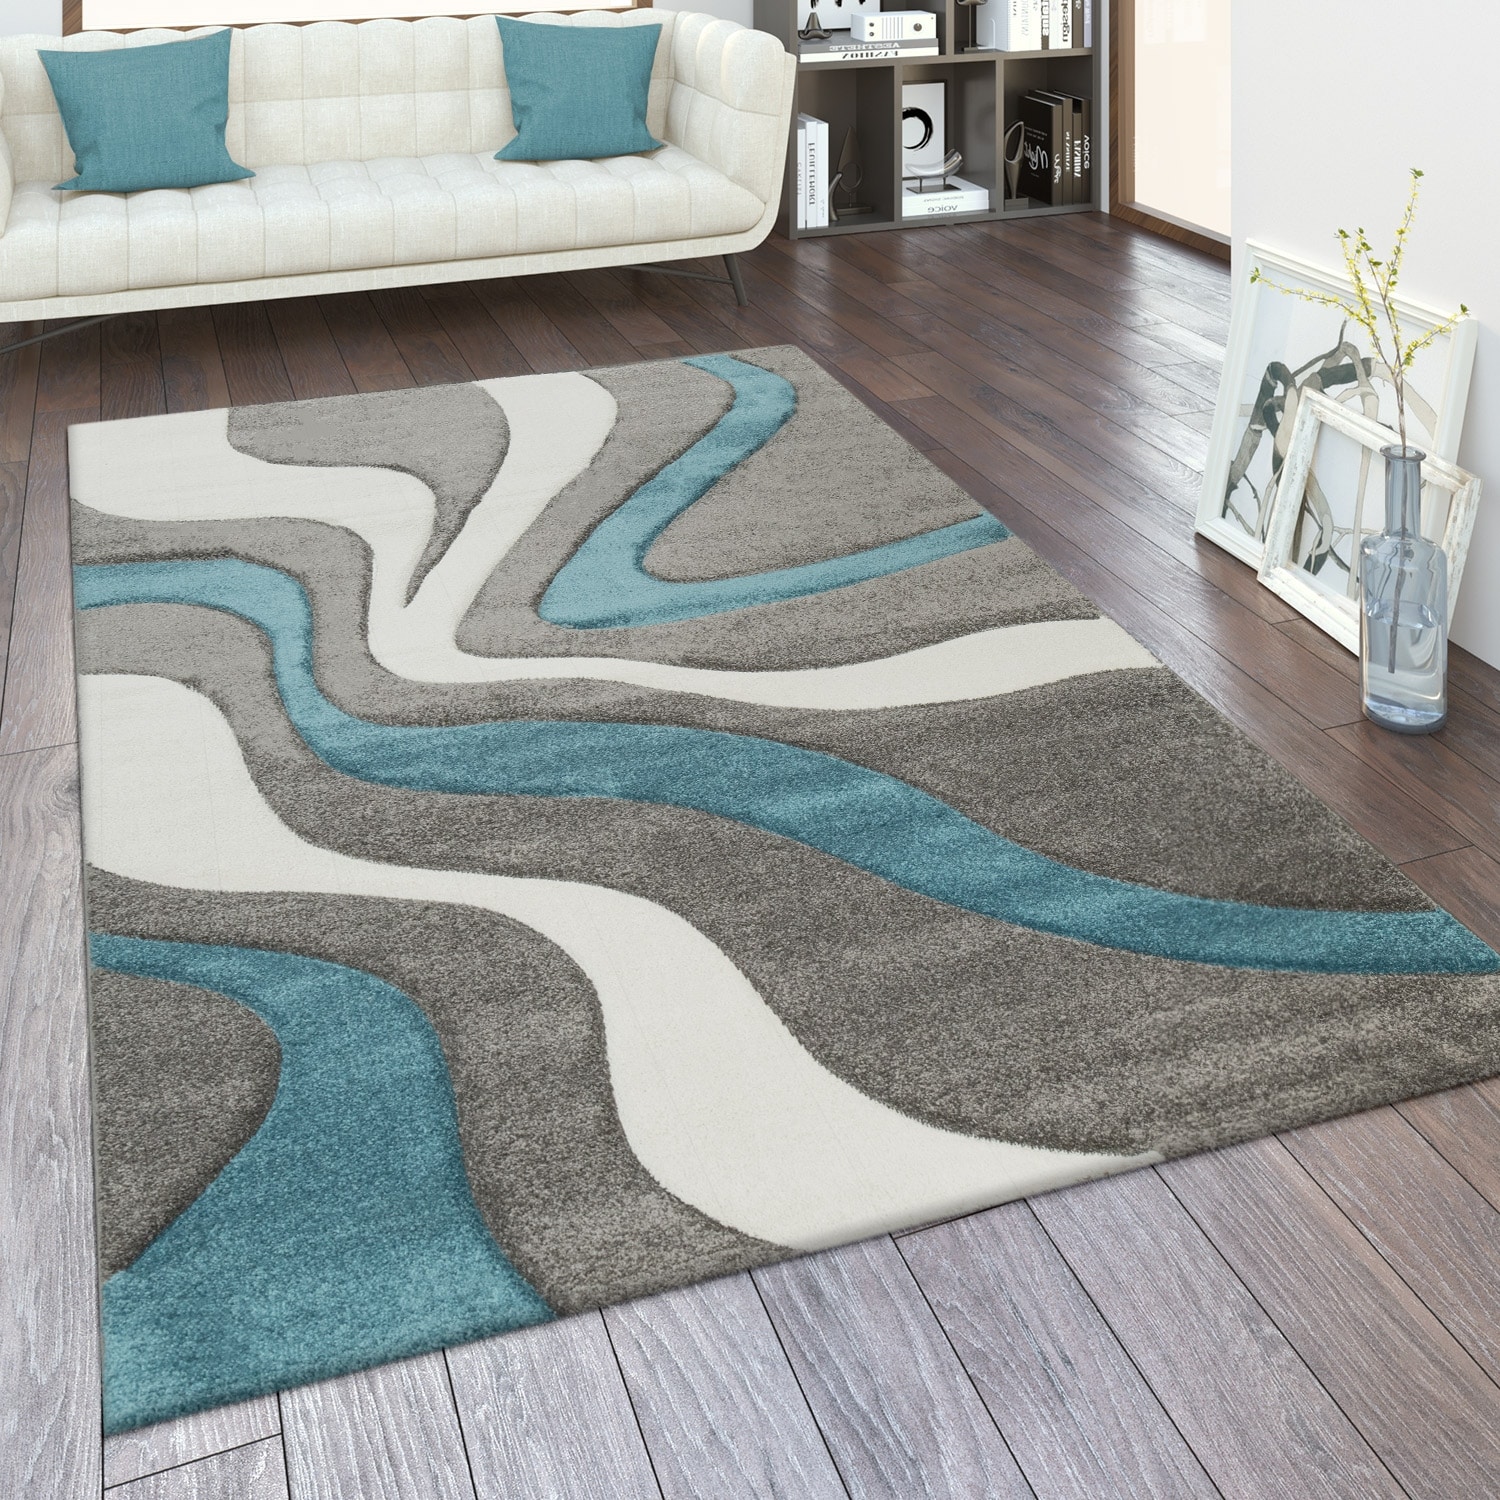 Paco Home Designer Area Rug with Contour Cut and Modern Wave Pattern 7'10" x 10'10" - Grey-blue - image 1 of 5